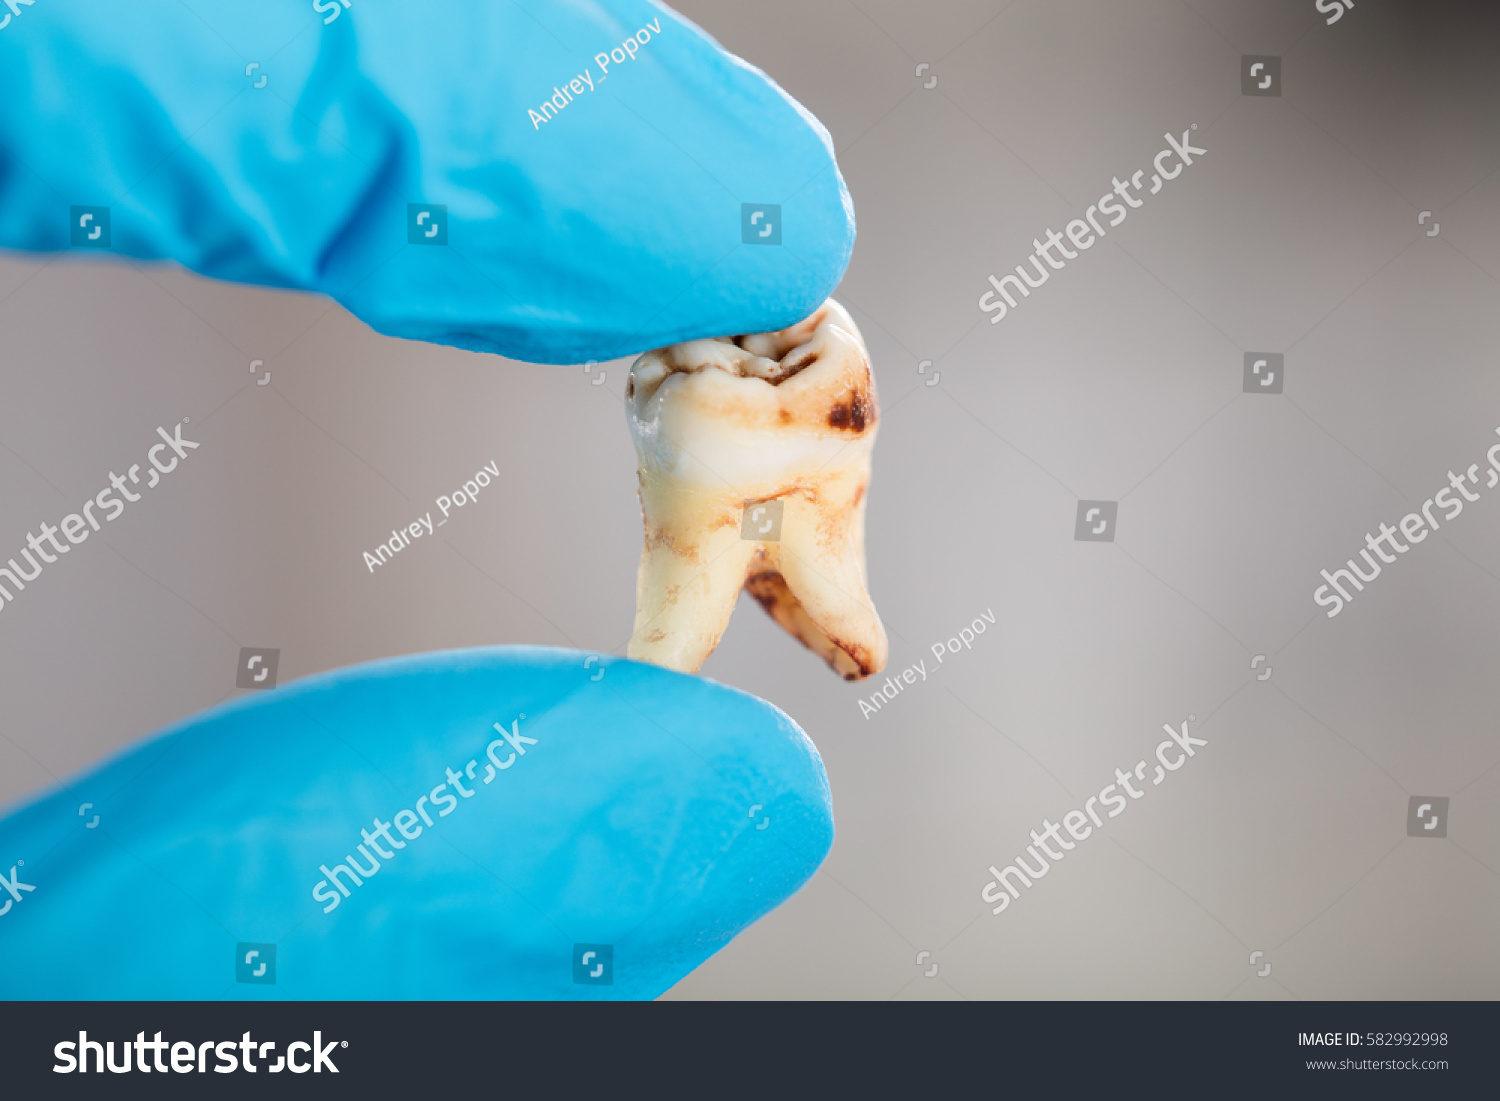 Close-up Of Dentist Hand In Glove Holding Decay Tooth #582992998